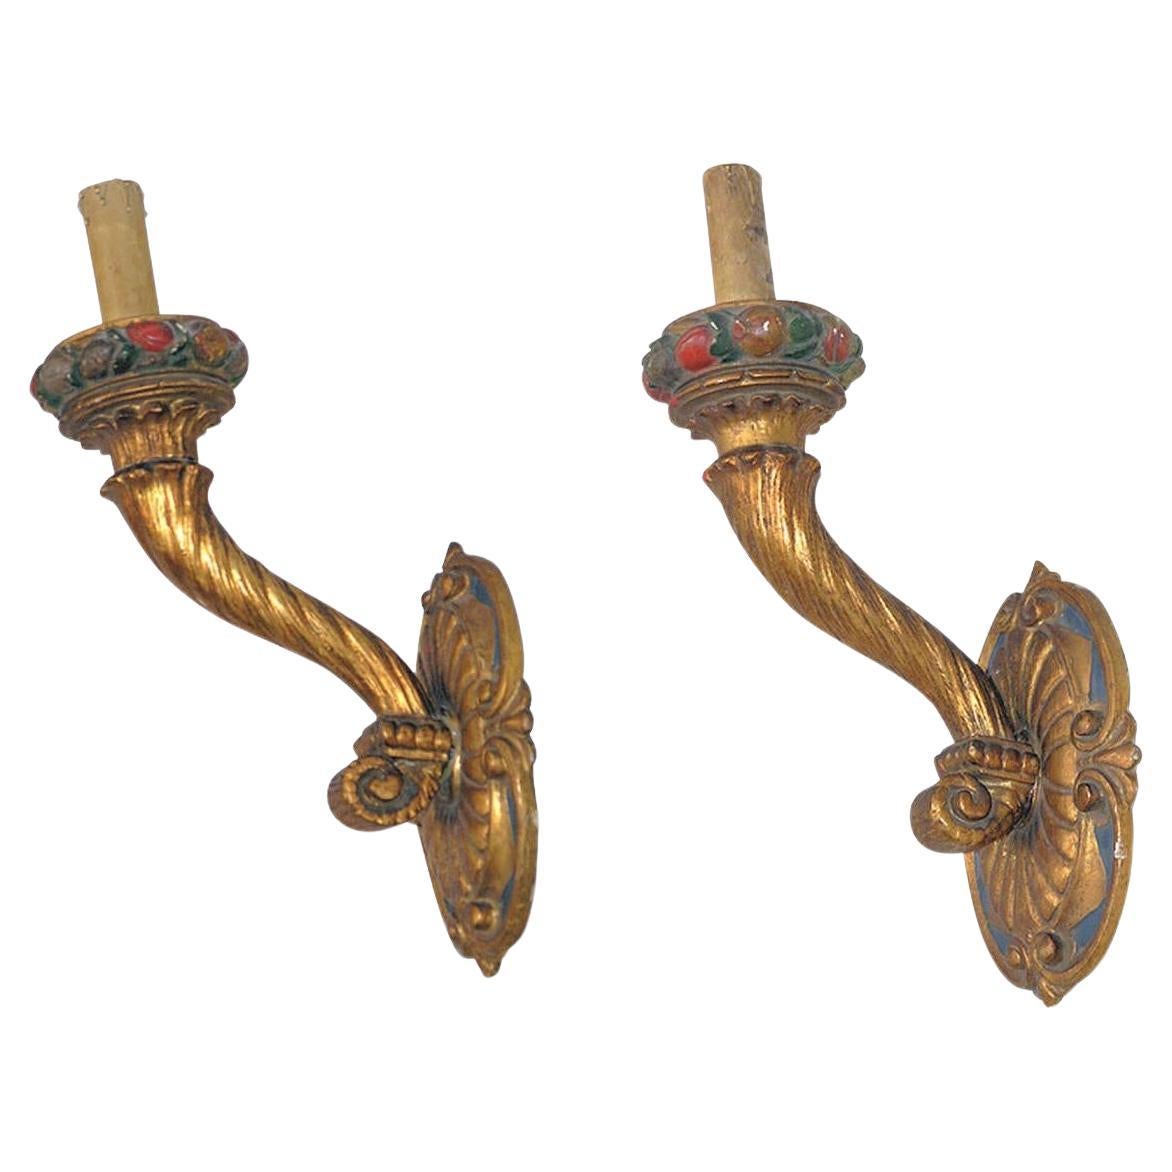 Pair of Large Italian Giltwood Wall Sconces